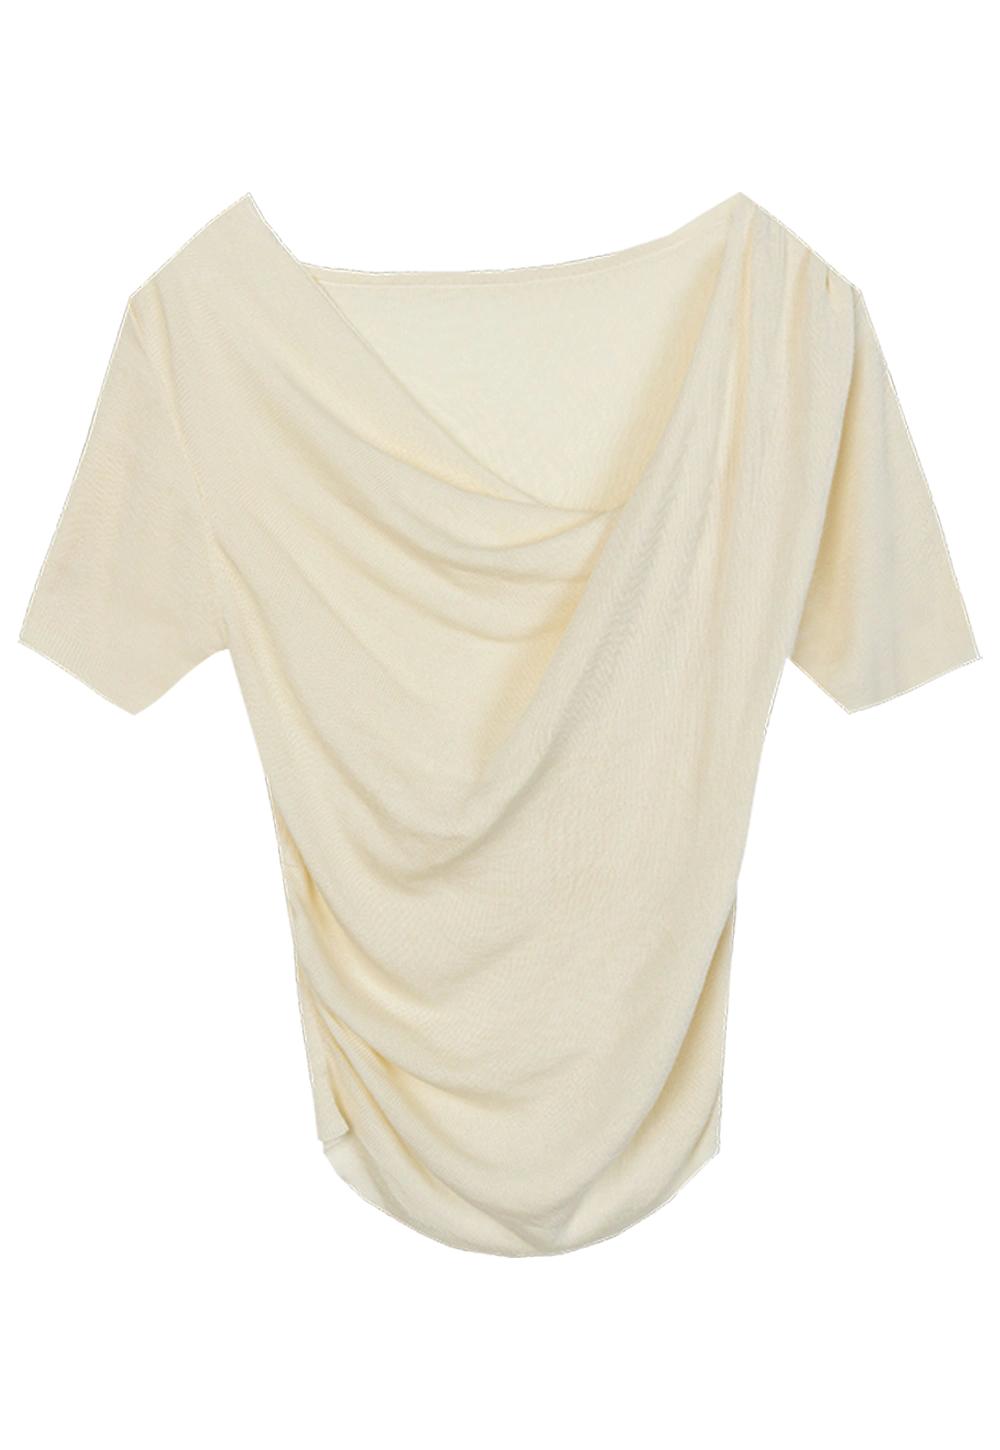 Women's Draped T-Shirt - Asymmetrical Neckline, Soft Fabric, Perfect for Elegant Casual Style